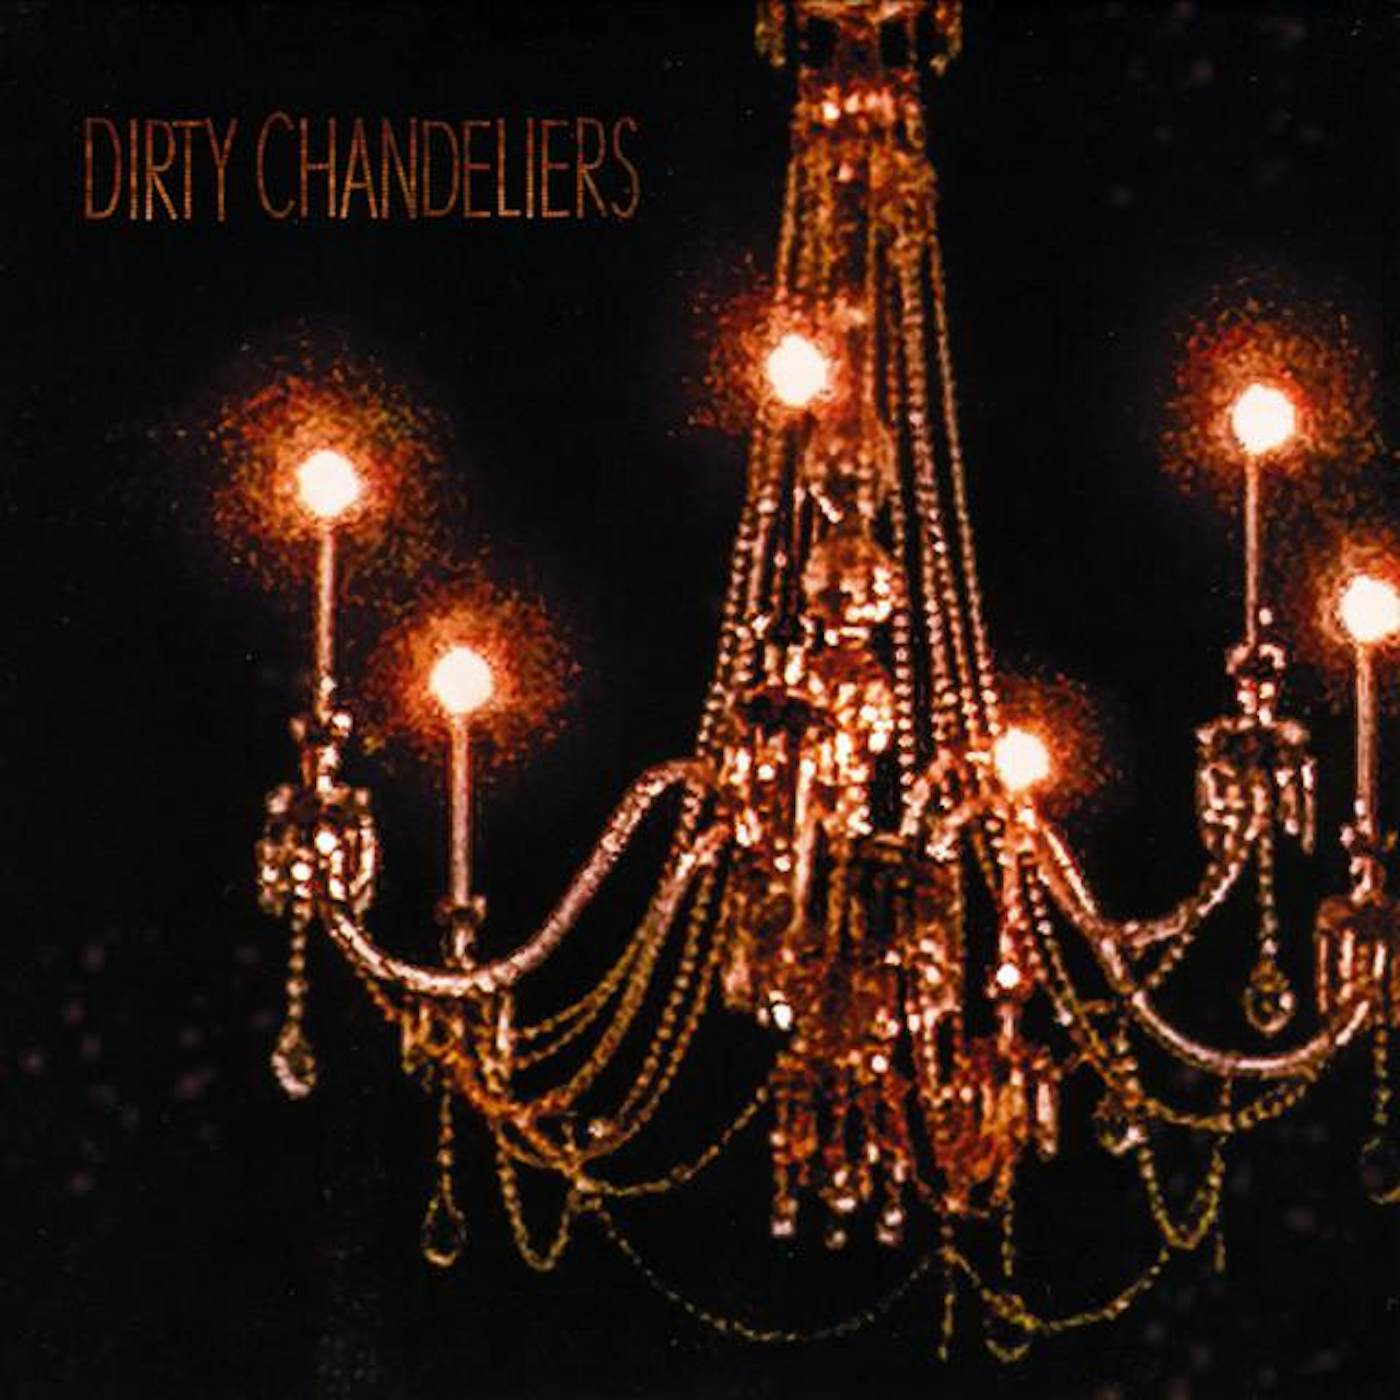 Dirty Chandeliers